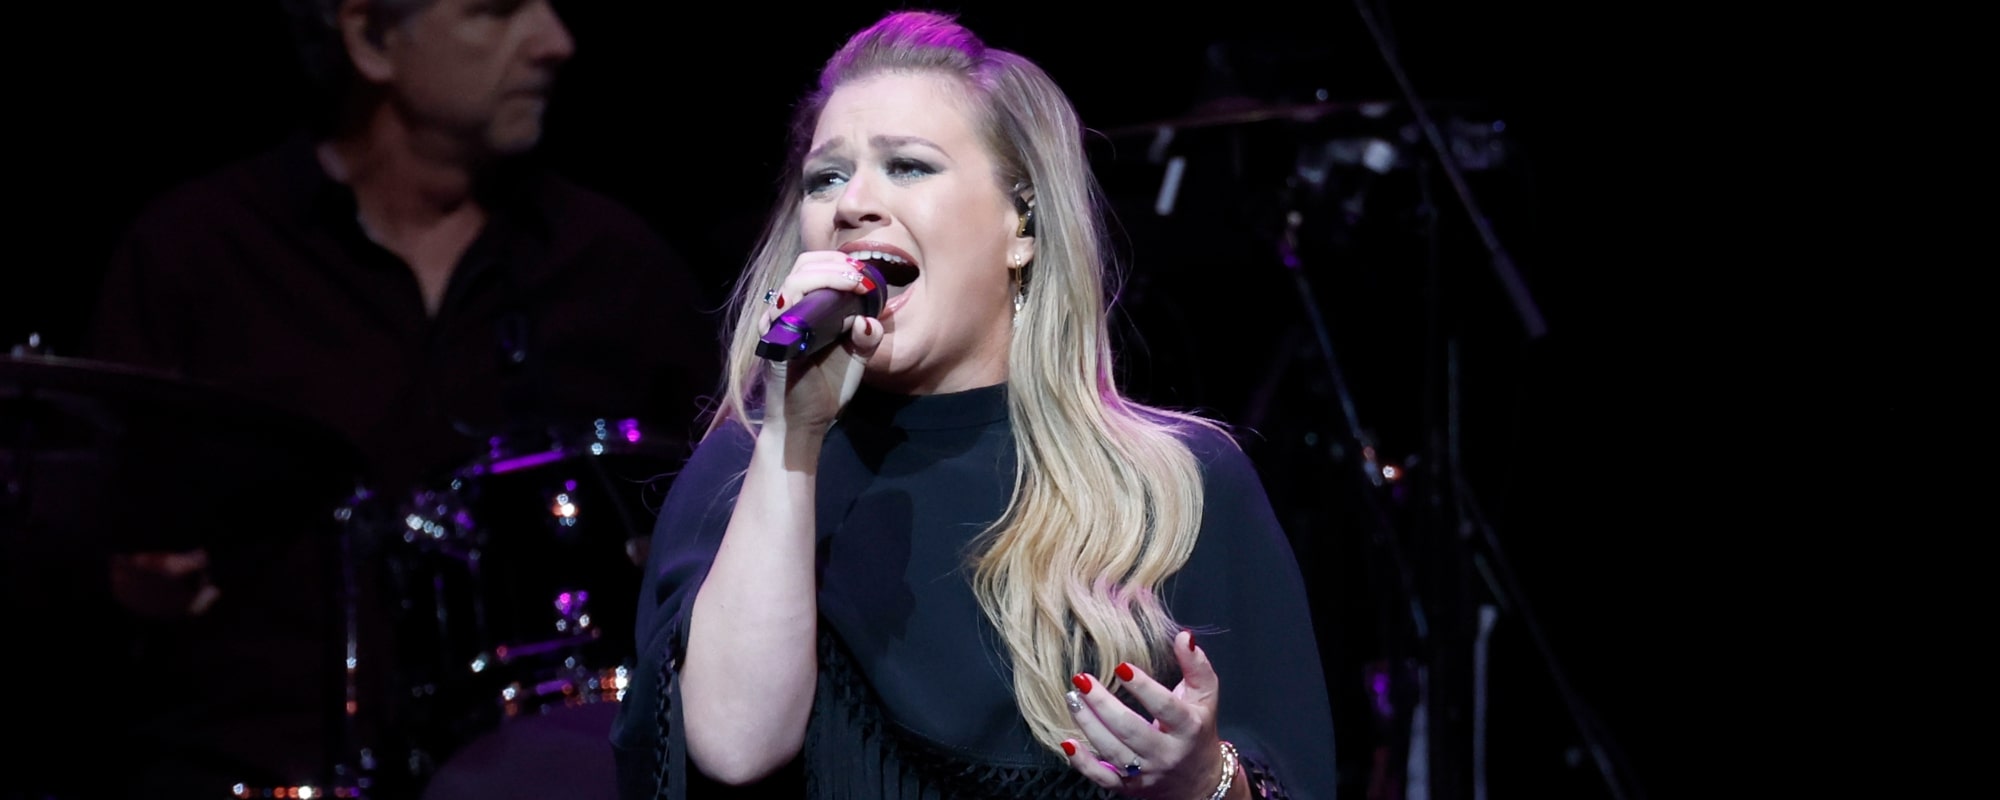 Kelly Clarkson’s Powerful Cover of “Save Me” Brings Jelly Roll to Tears